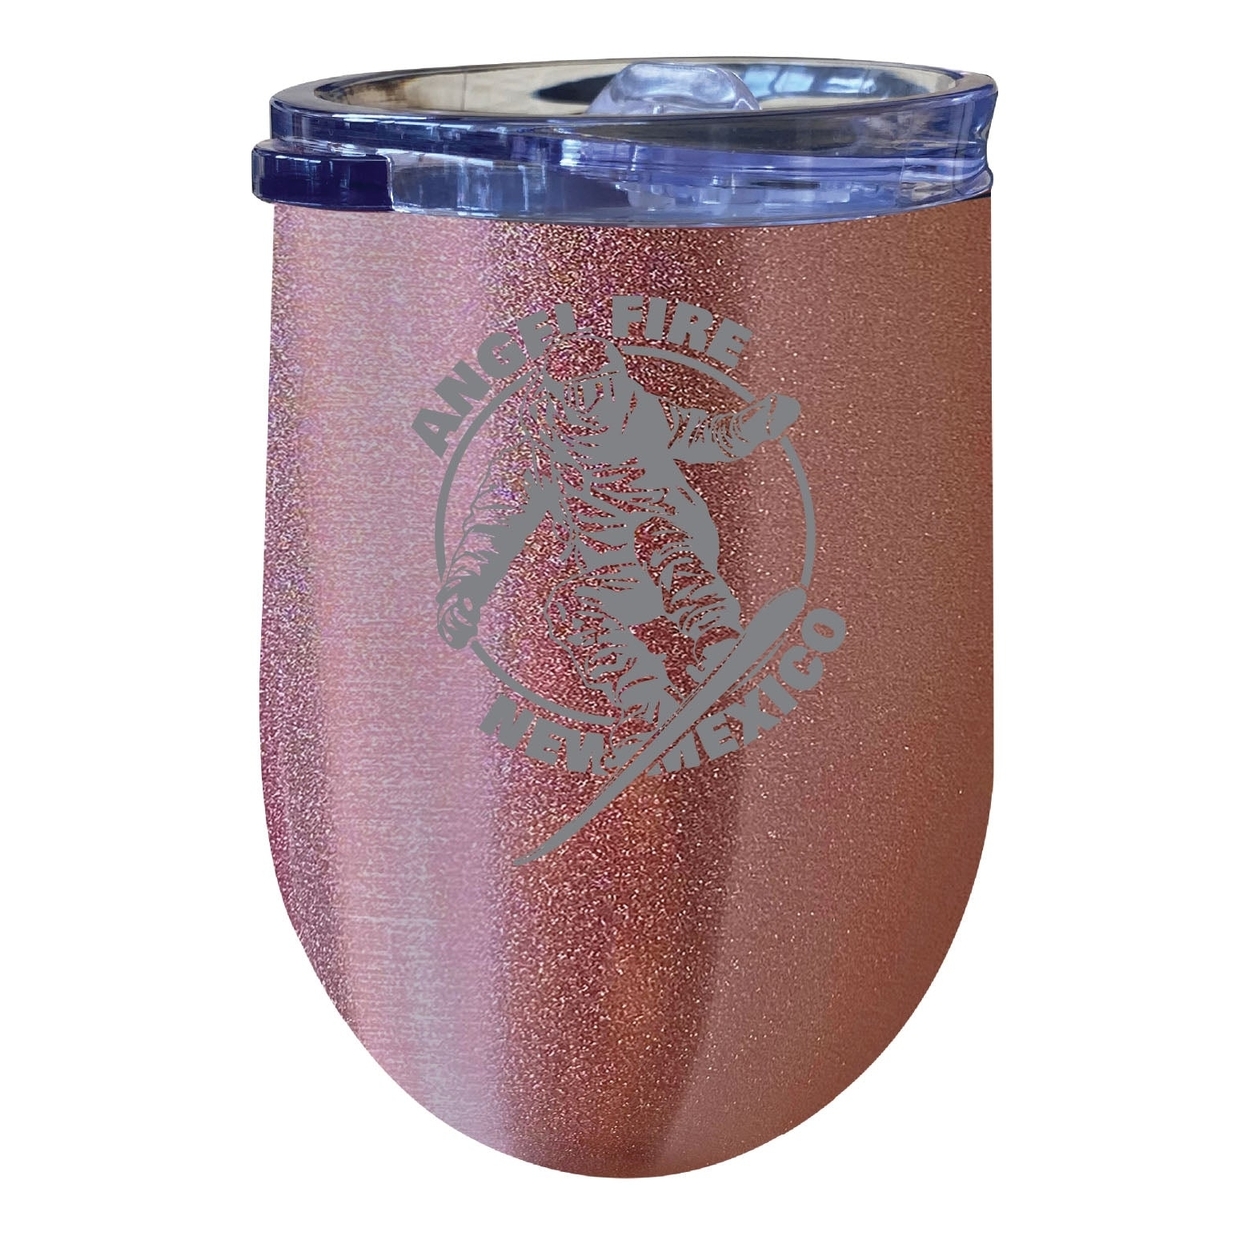 Angel Fire New Mexico Souvenir 12 Oz Engraved Insulated Wine Stainless Steel Tumbler - Rose Gold,,2-Pack